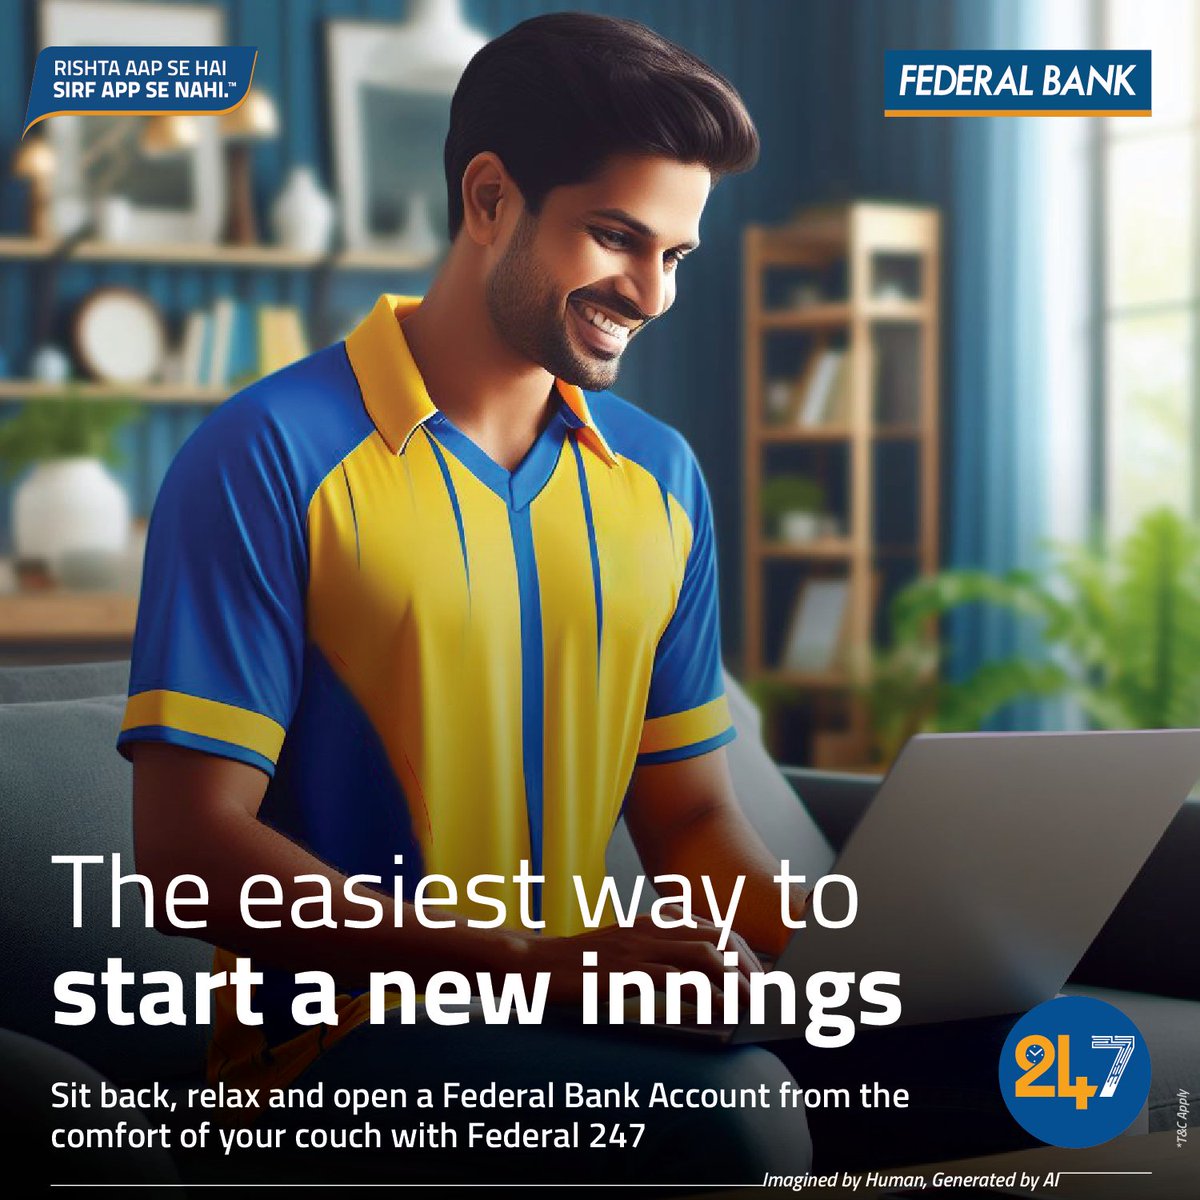 Your new innings in savings deserves a strong and hassle free opening! Visit federalbank.co.in/federal247 to get started today! #FederalBank #IPL2024 #Federal247